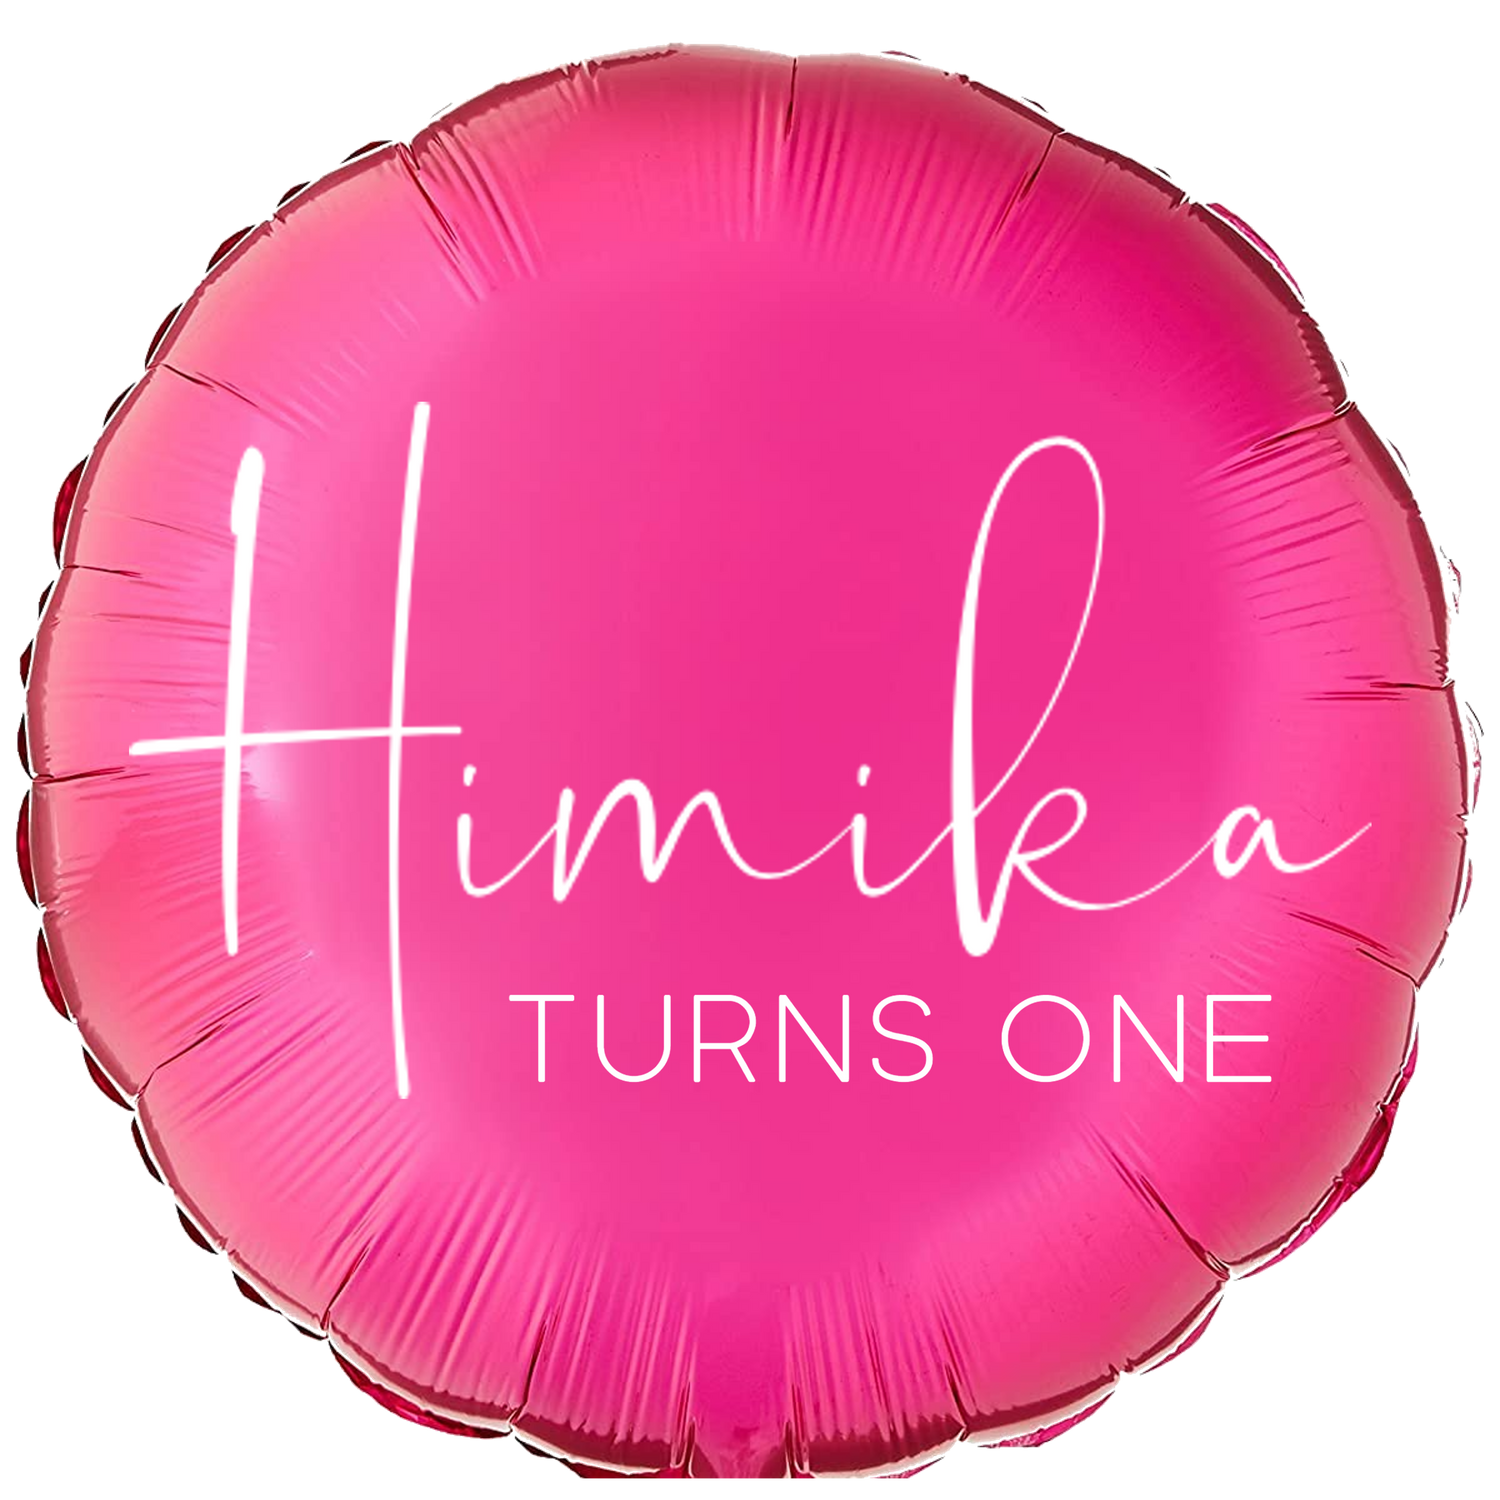 Custom Name/Text/Message Hot Pink Round Personalized Balloons For First/Second/Third/Fourth/Fifth/Sixth, Seventh/Eighth/Ninth/Tenth/Teen Birthday, Milestone Birthday or a Special Themed Birthday Party or an Indoor/Outdoor Event. Supports Helium/Air, Luxury Bespoke Balloons Are a Perfect Surprise For Your Baby Boy And Girl.